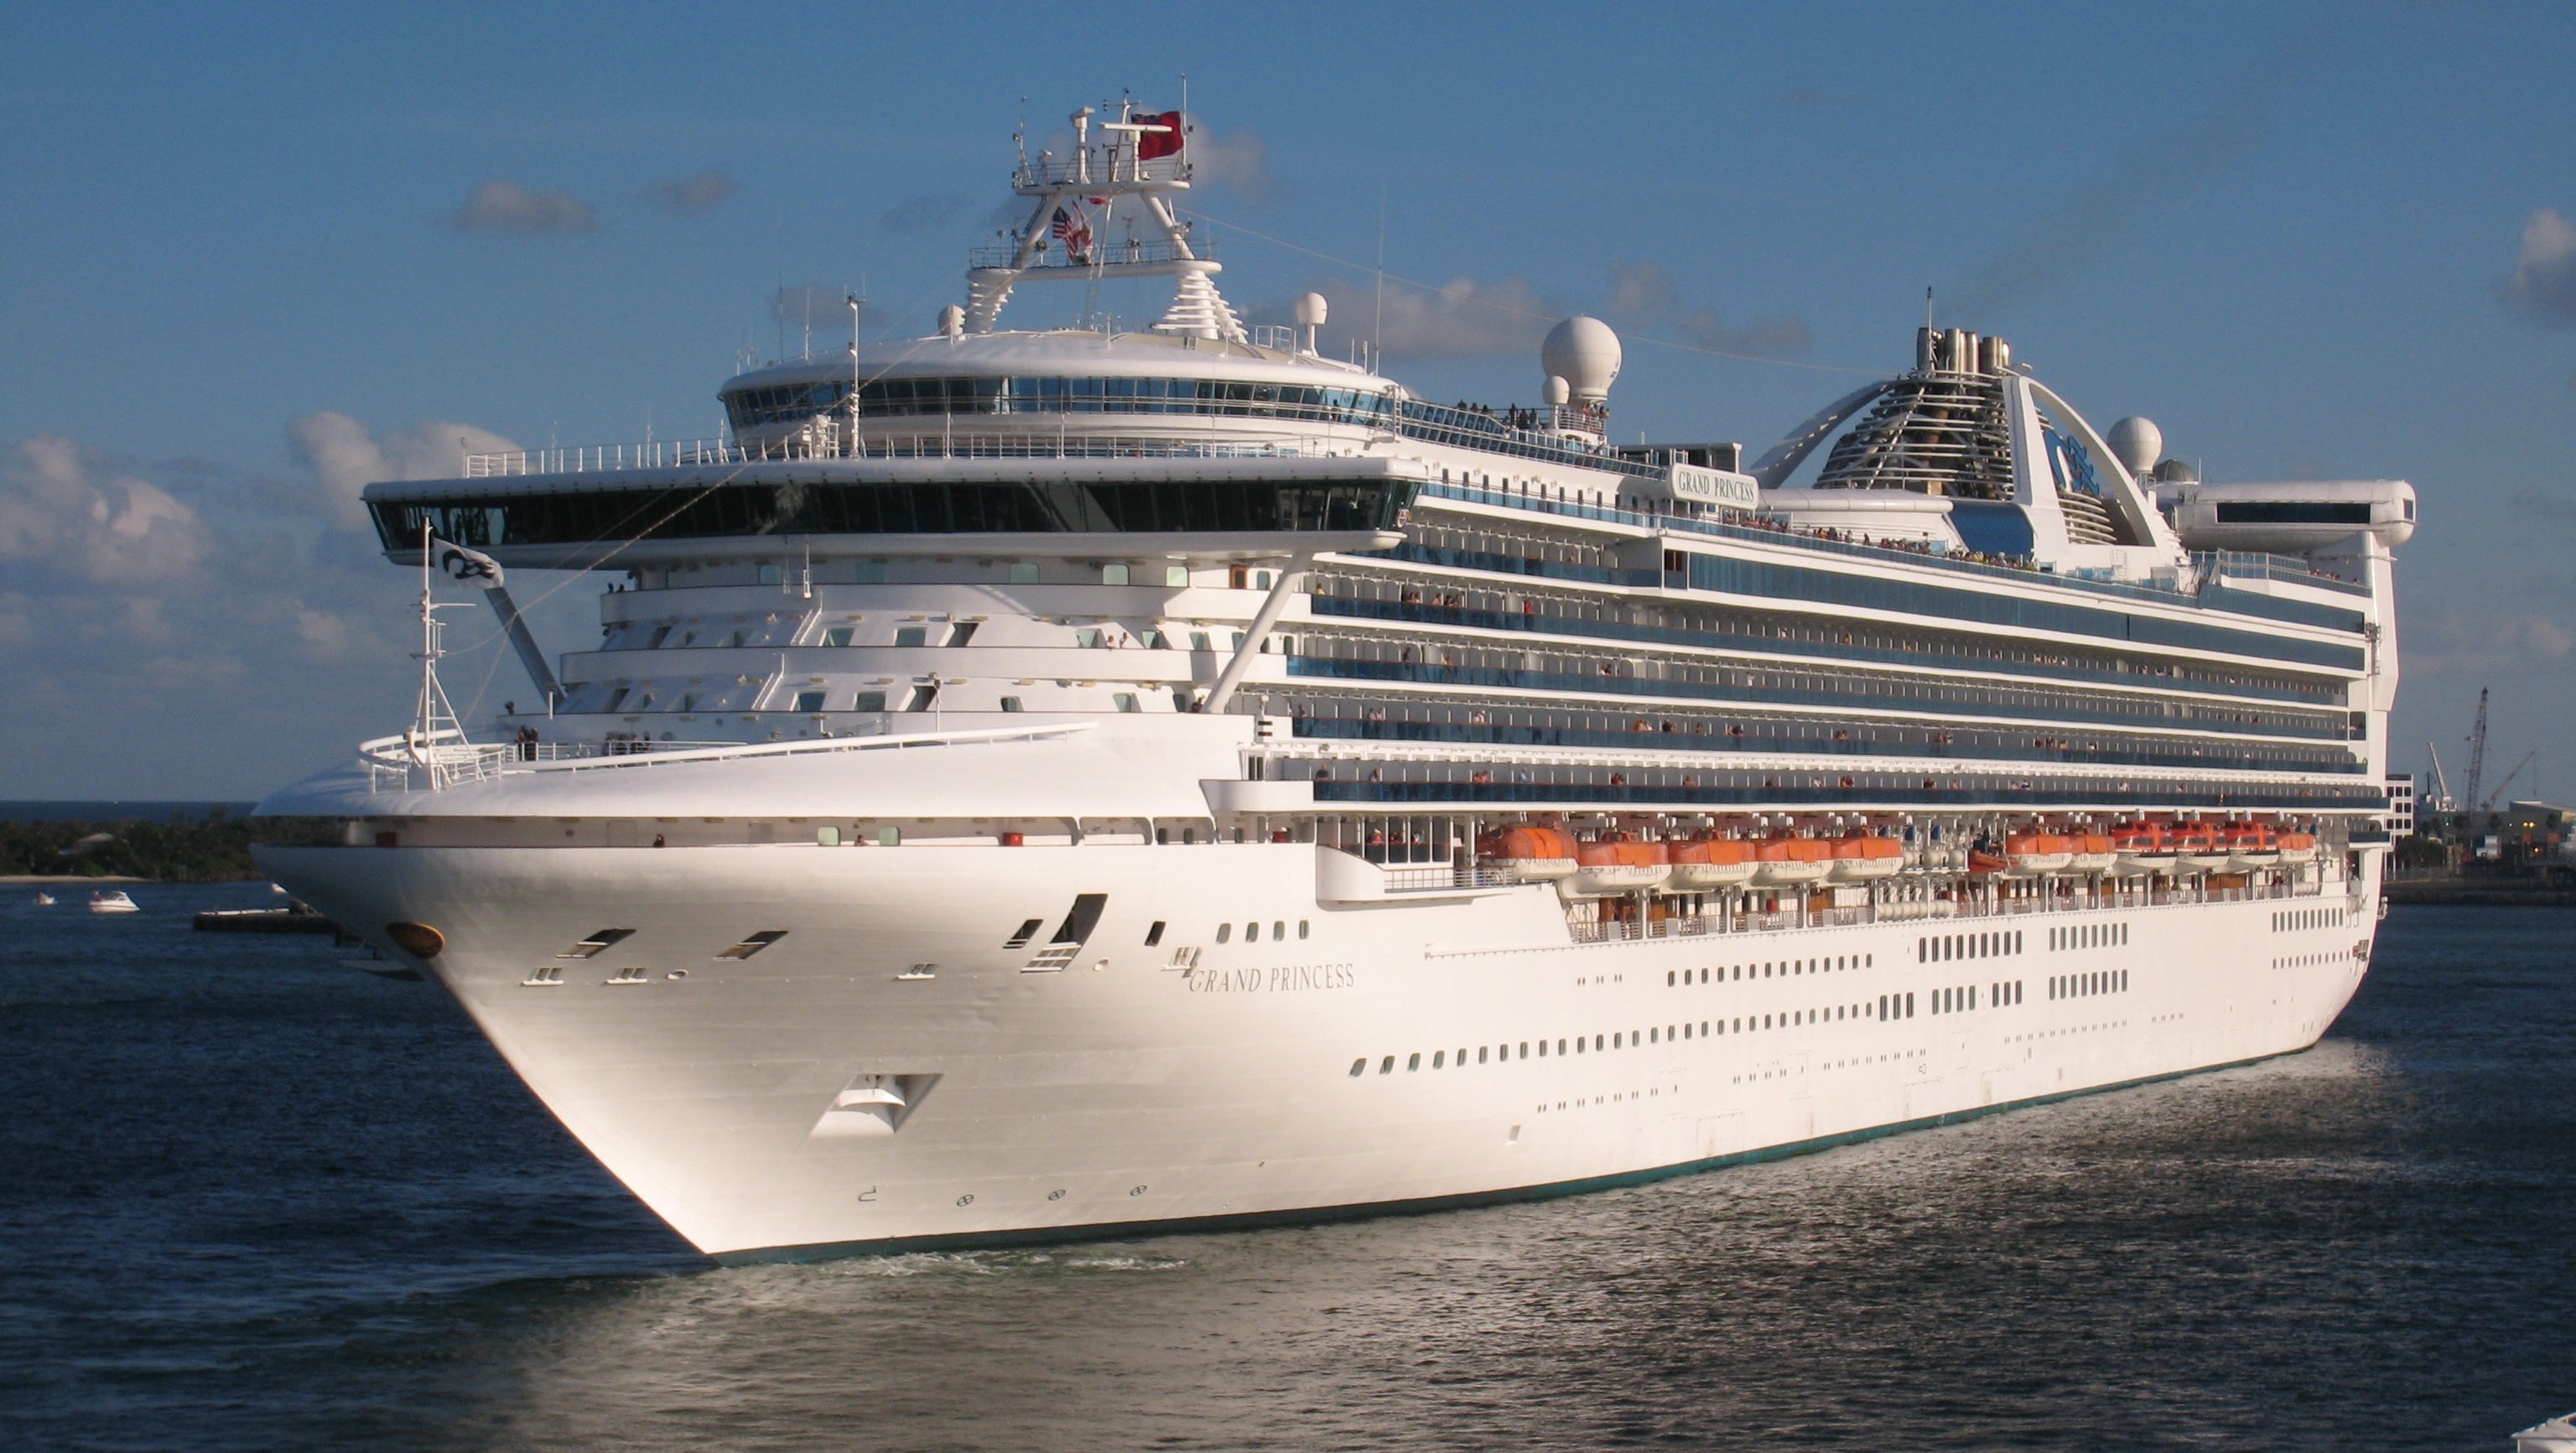 pictures of the grand princess cruise ship